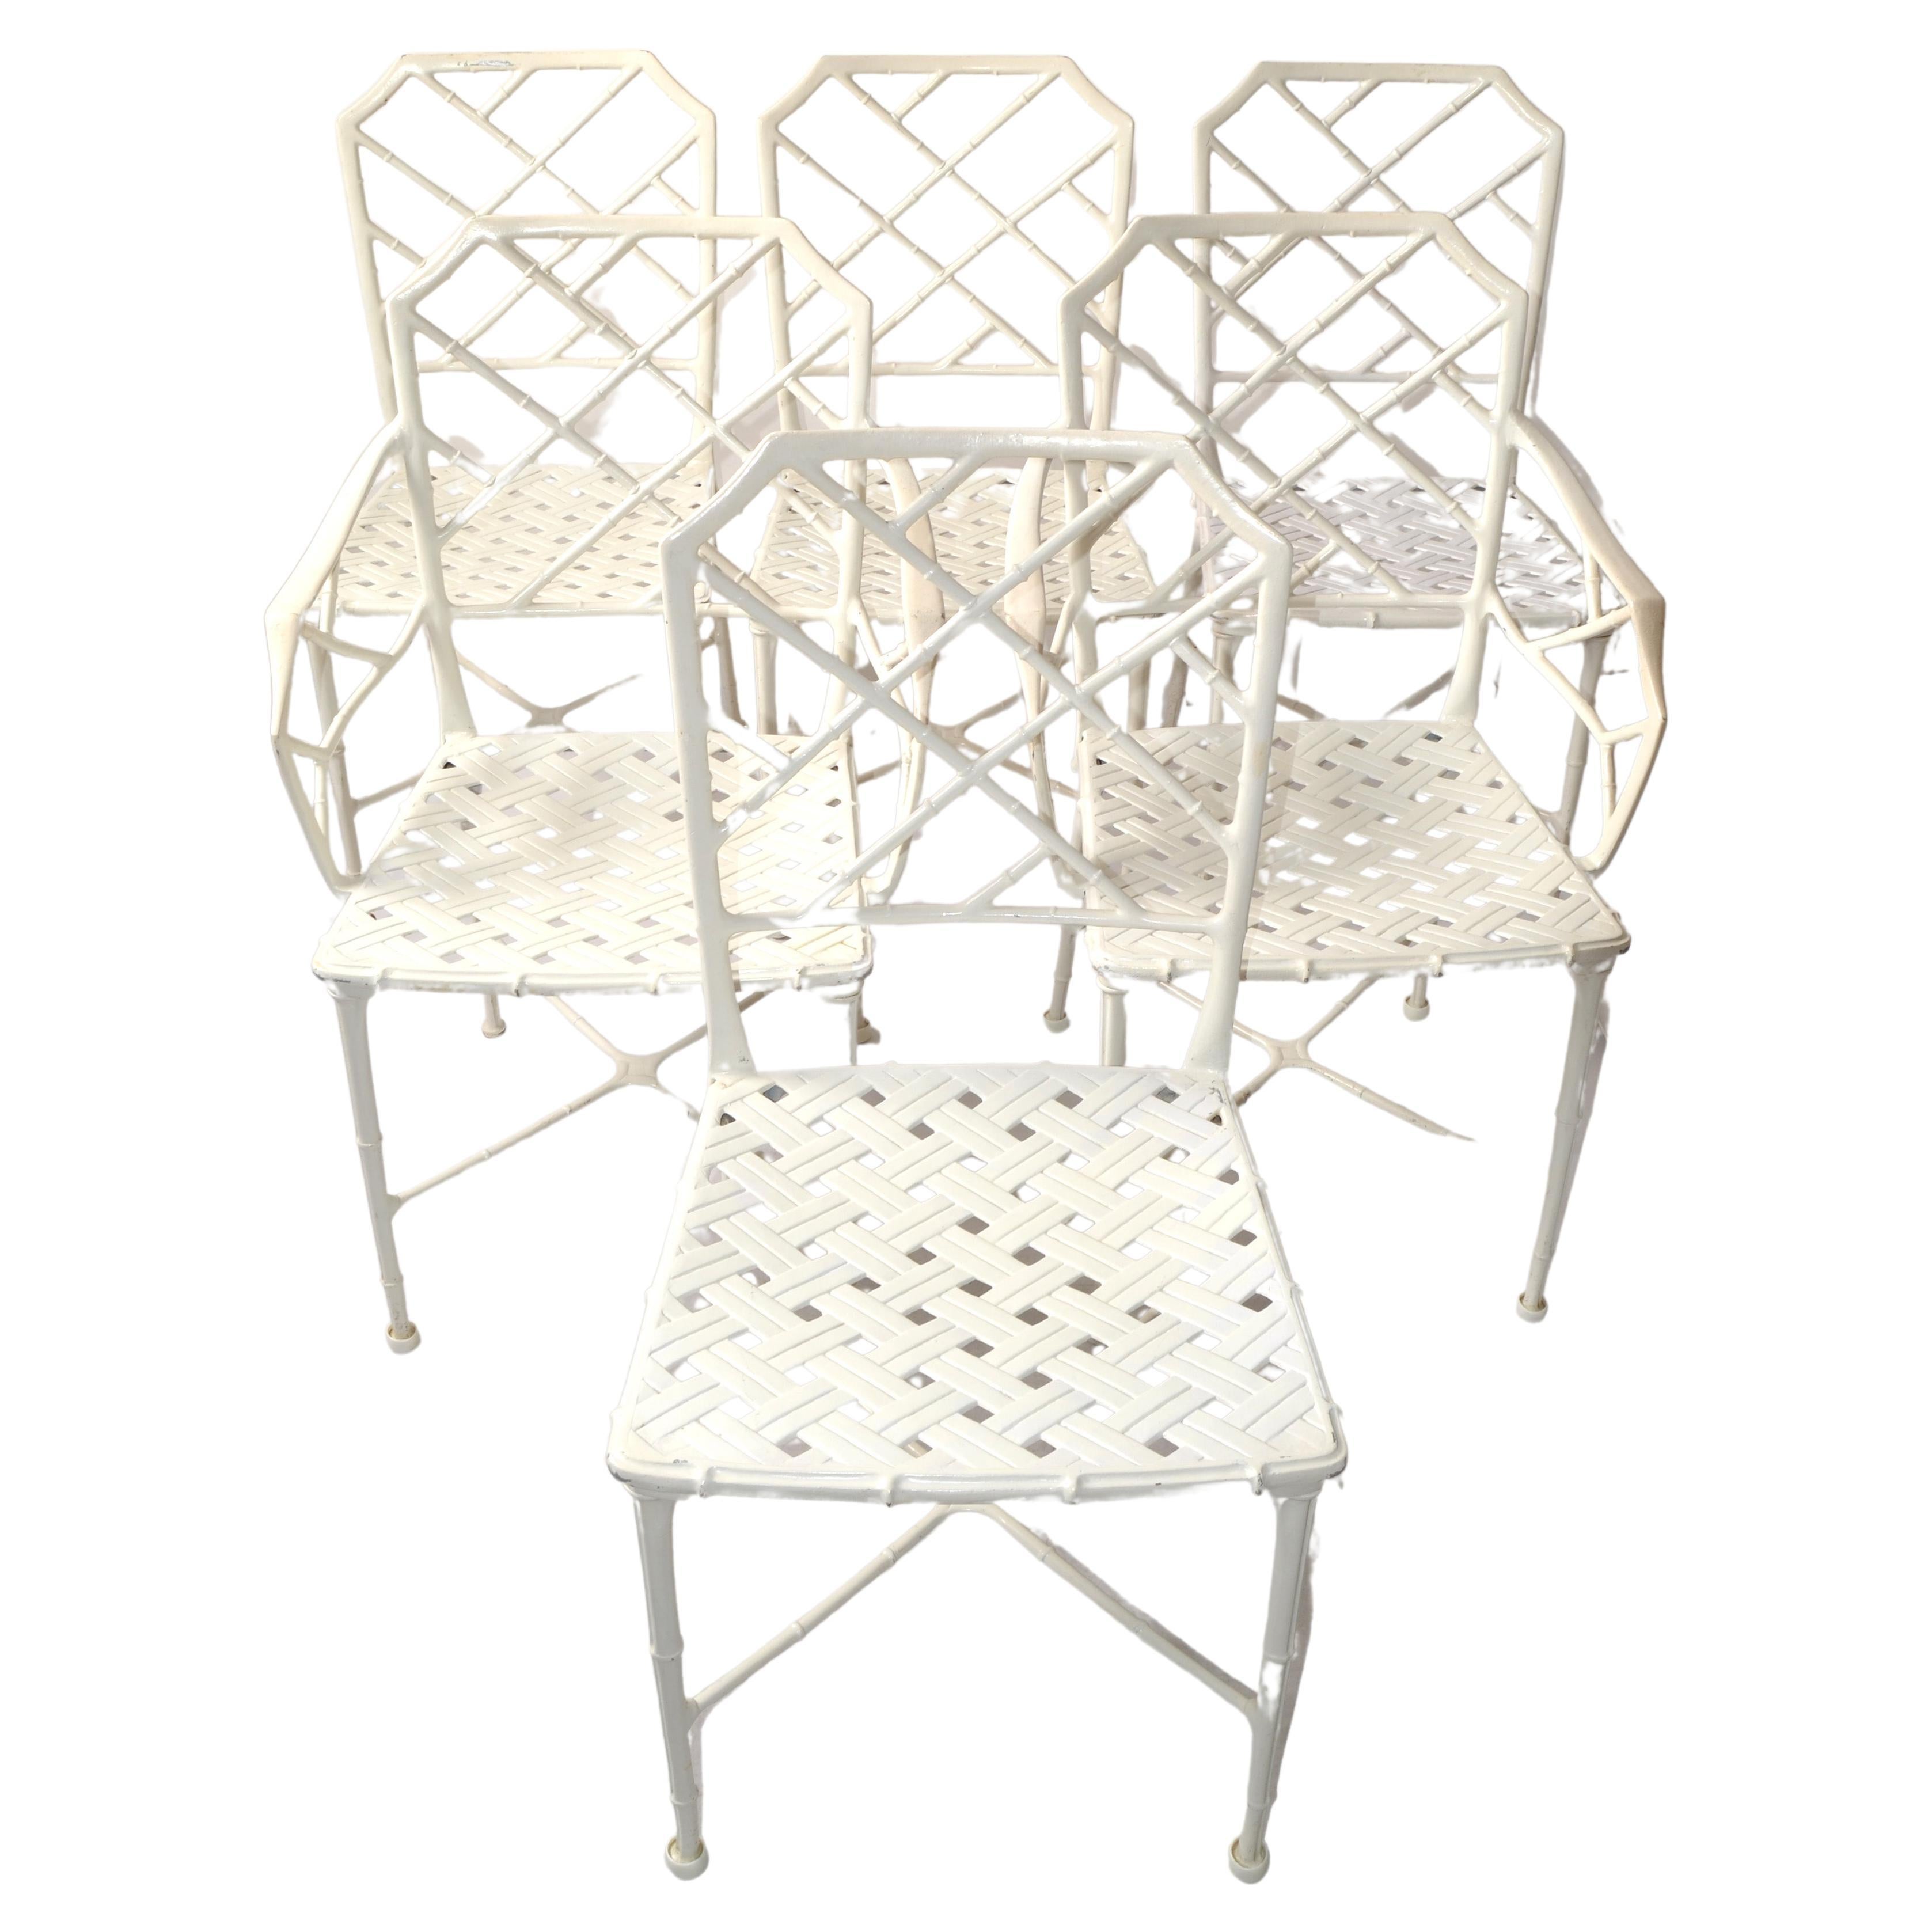 Set of 6 Calcutta Outdoor Patio Furniture designed by Hall Bradley in 1967 and manufactured by Brown Jordon, USA.
Featuring 4 Side Chairs and 2 Armchairs in cast Aluminum in distressed white finish with woven Lattice design in Chinese Chippendale